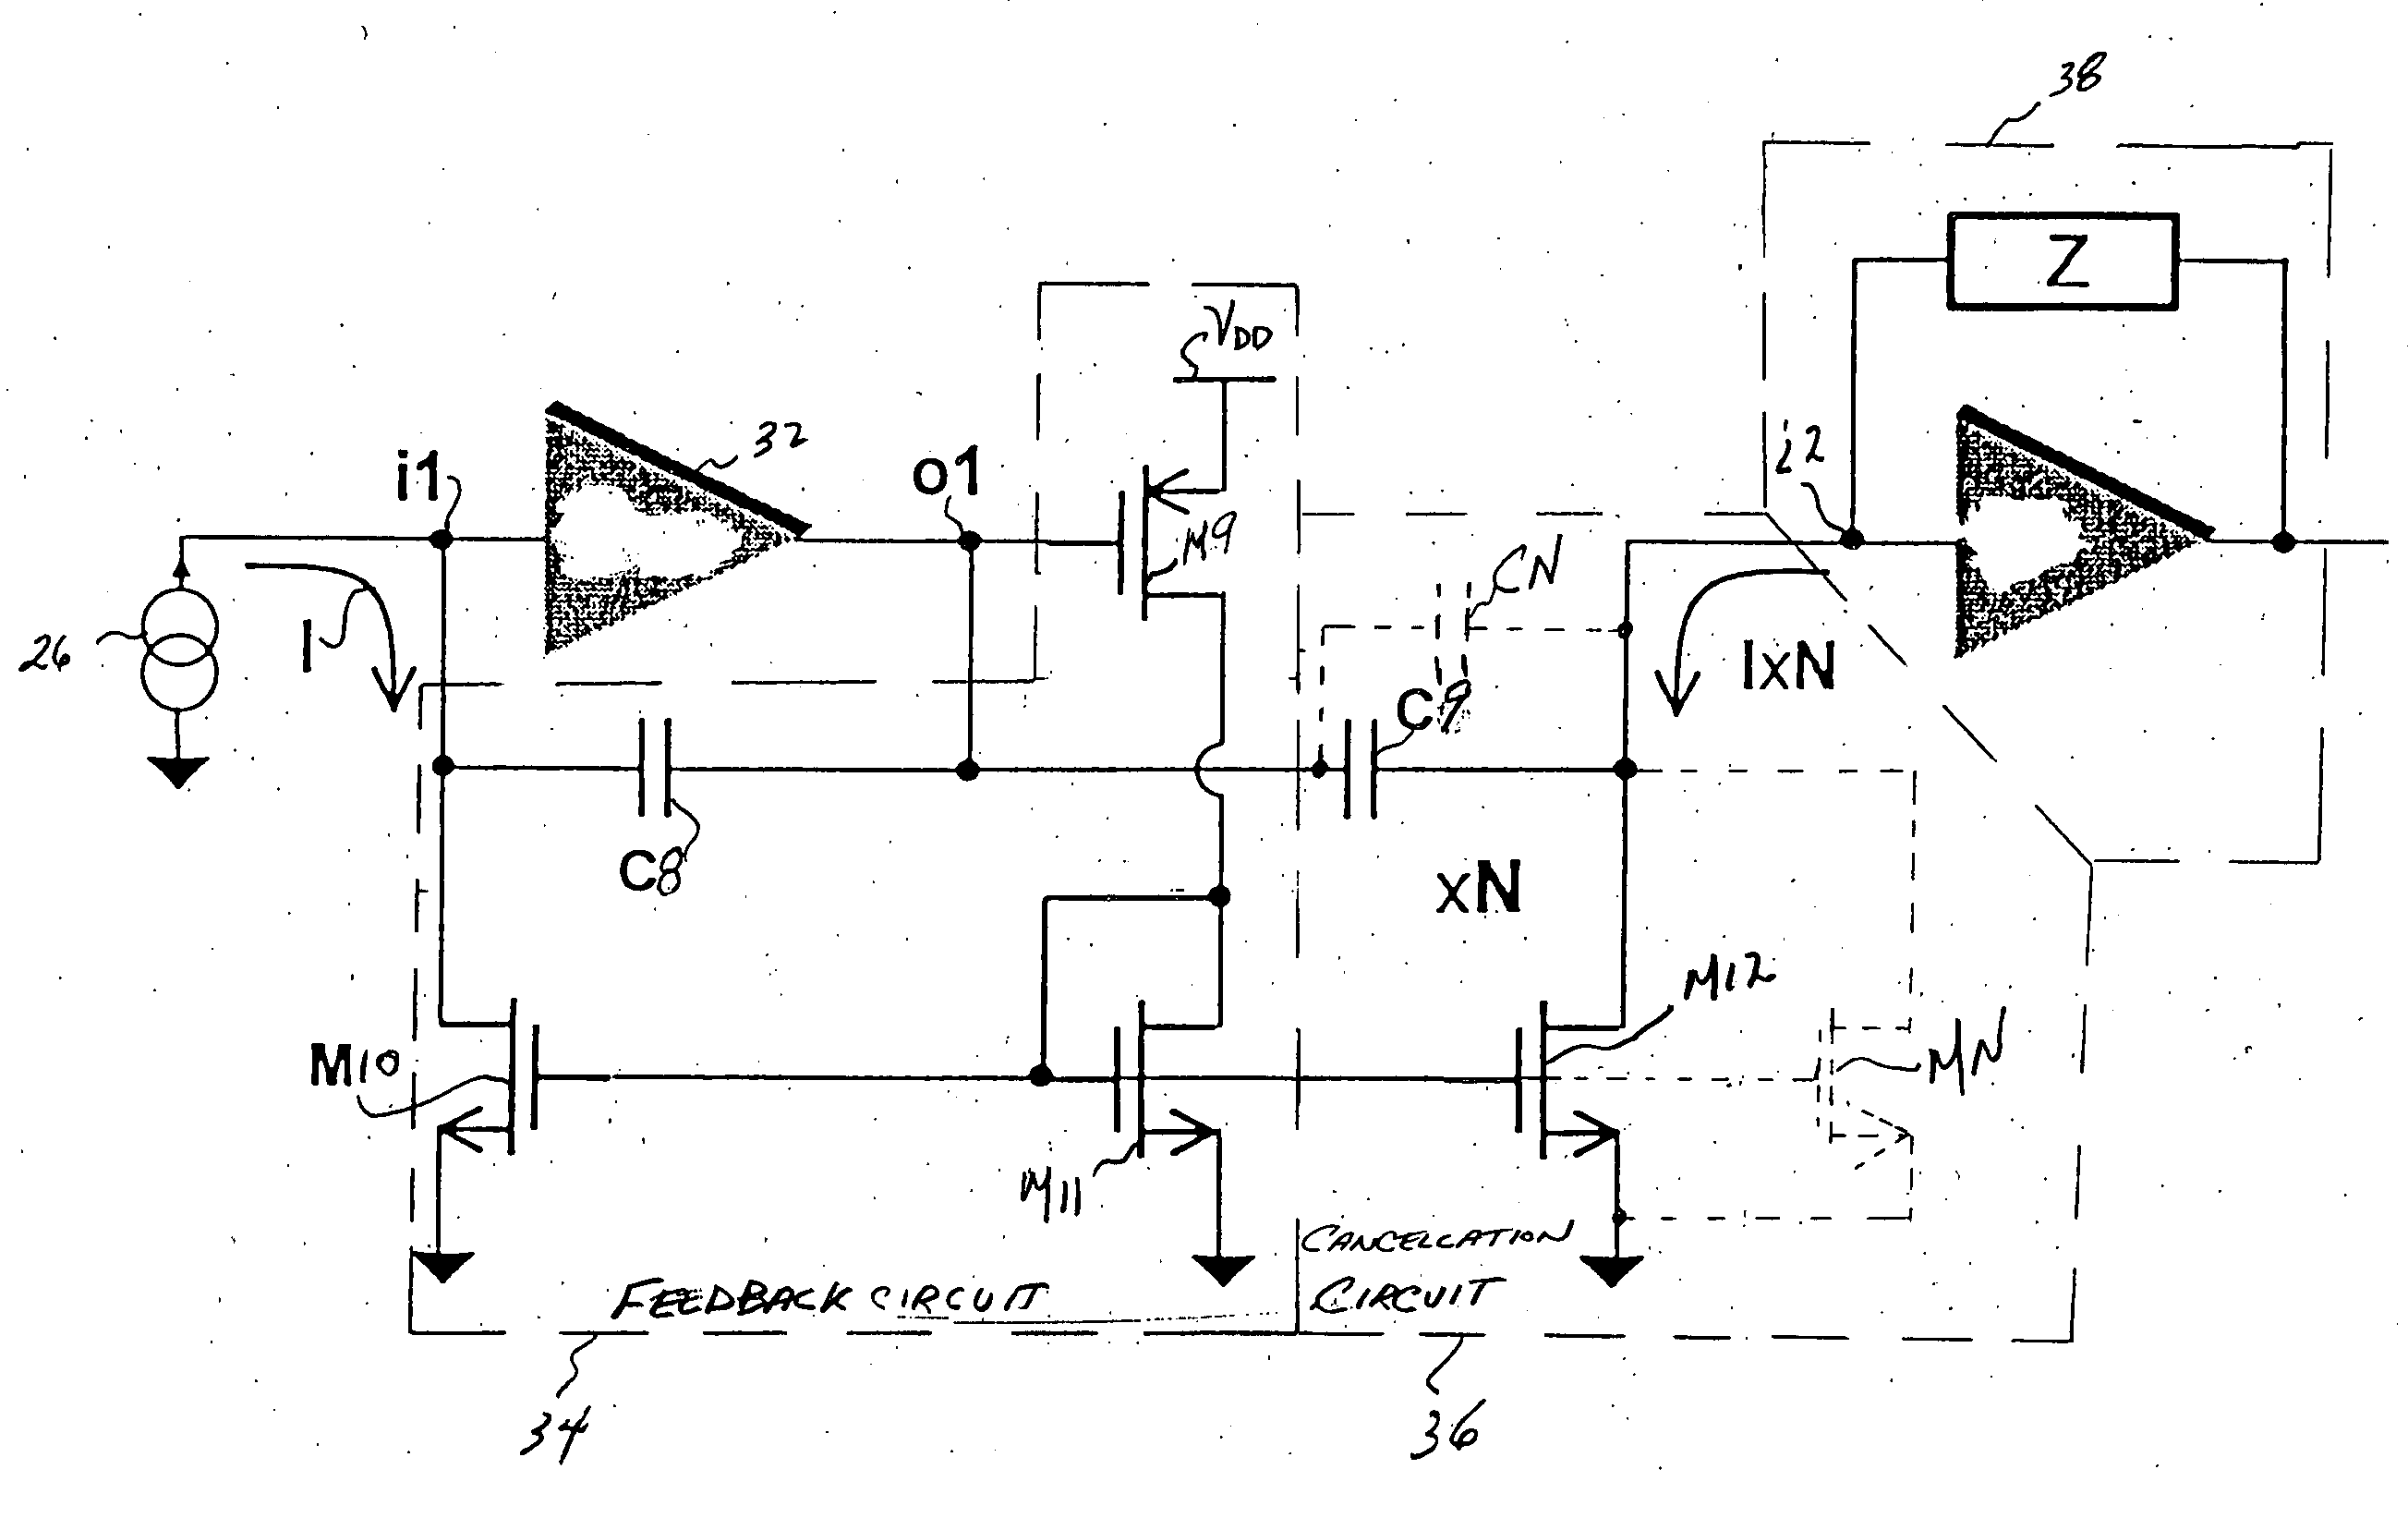 Method and apparatus for linear low-frequency feedback in monolithic low-noise charge amplifiers